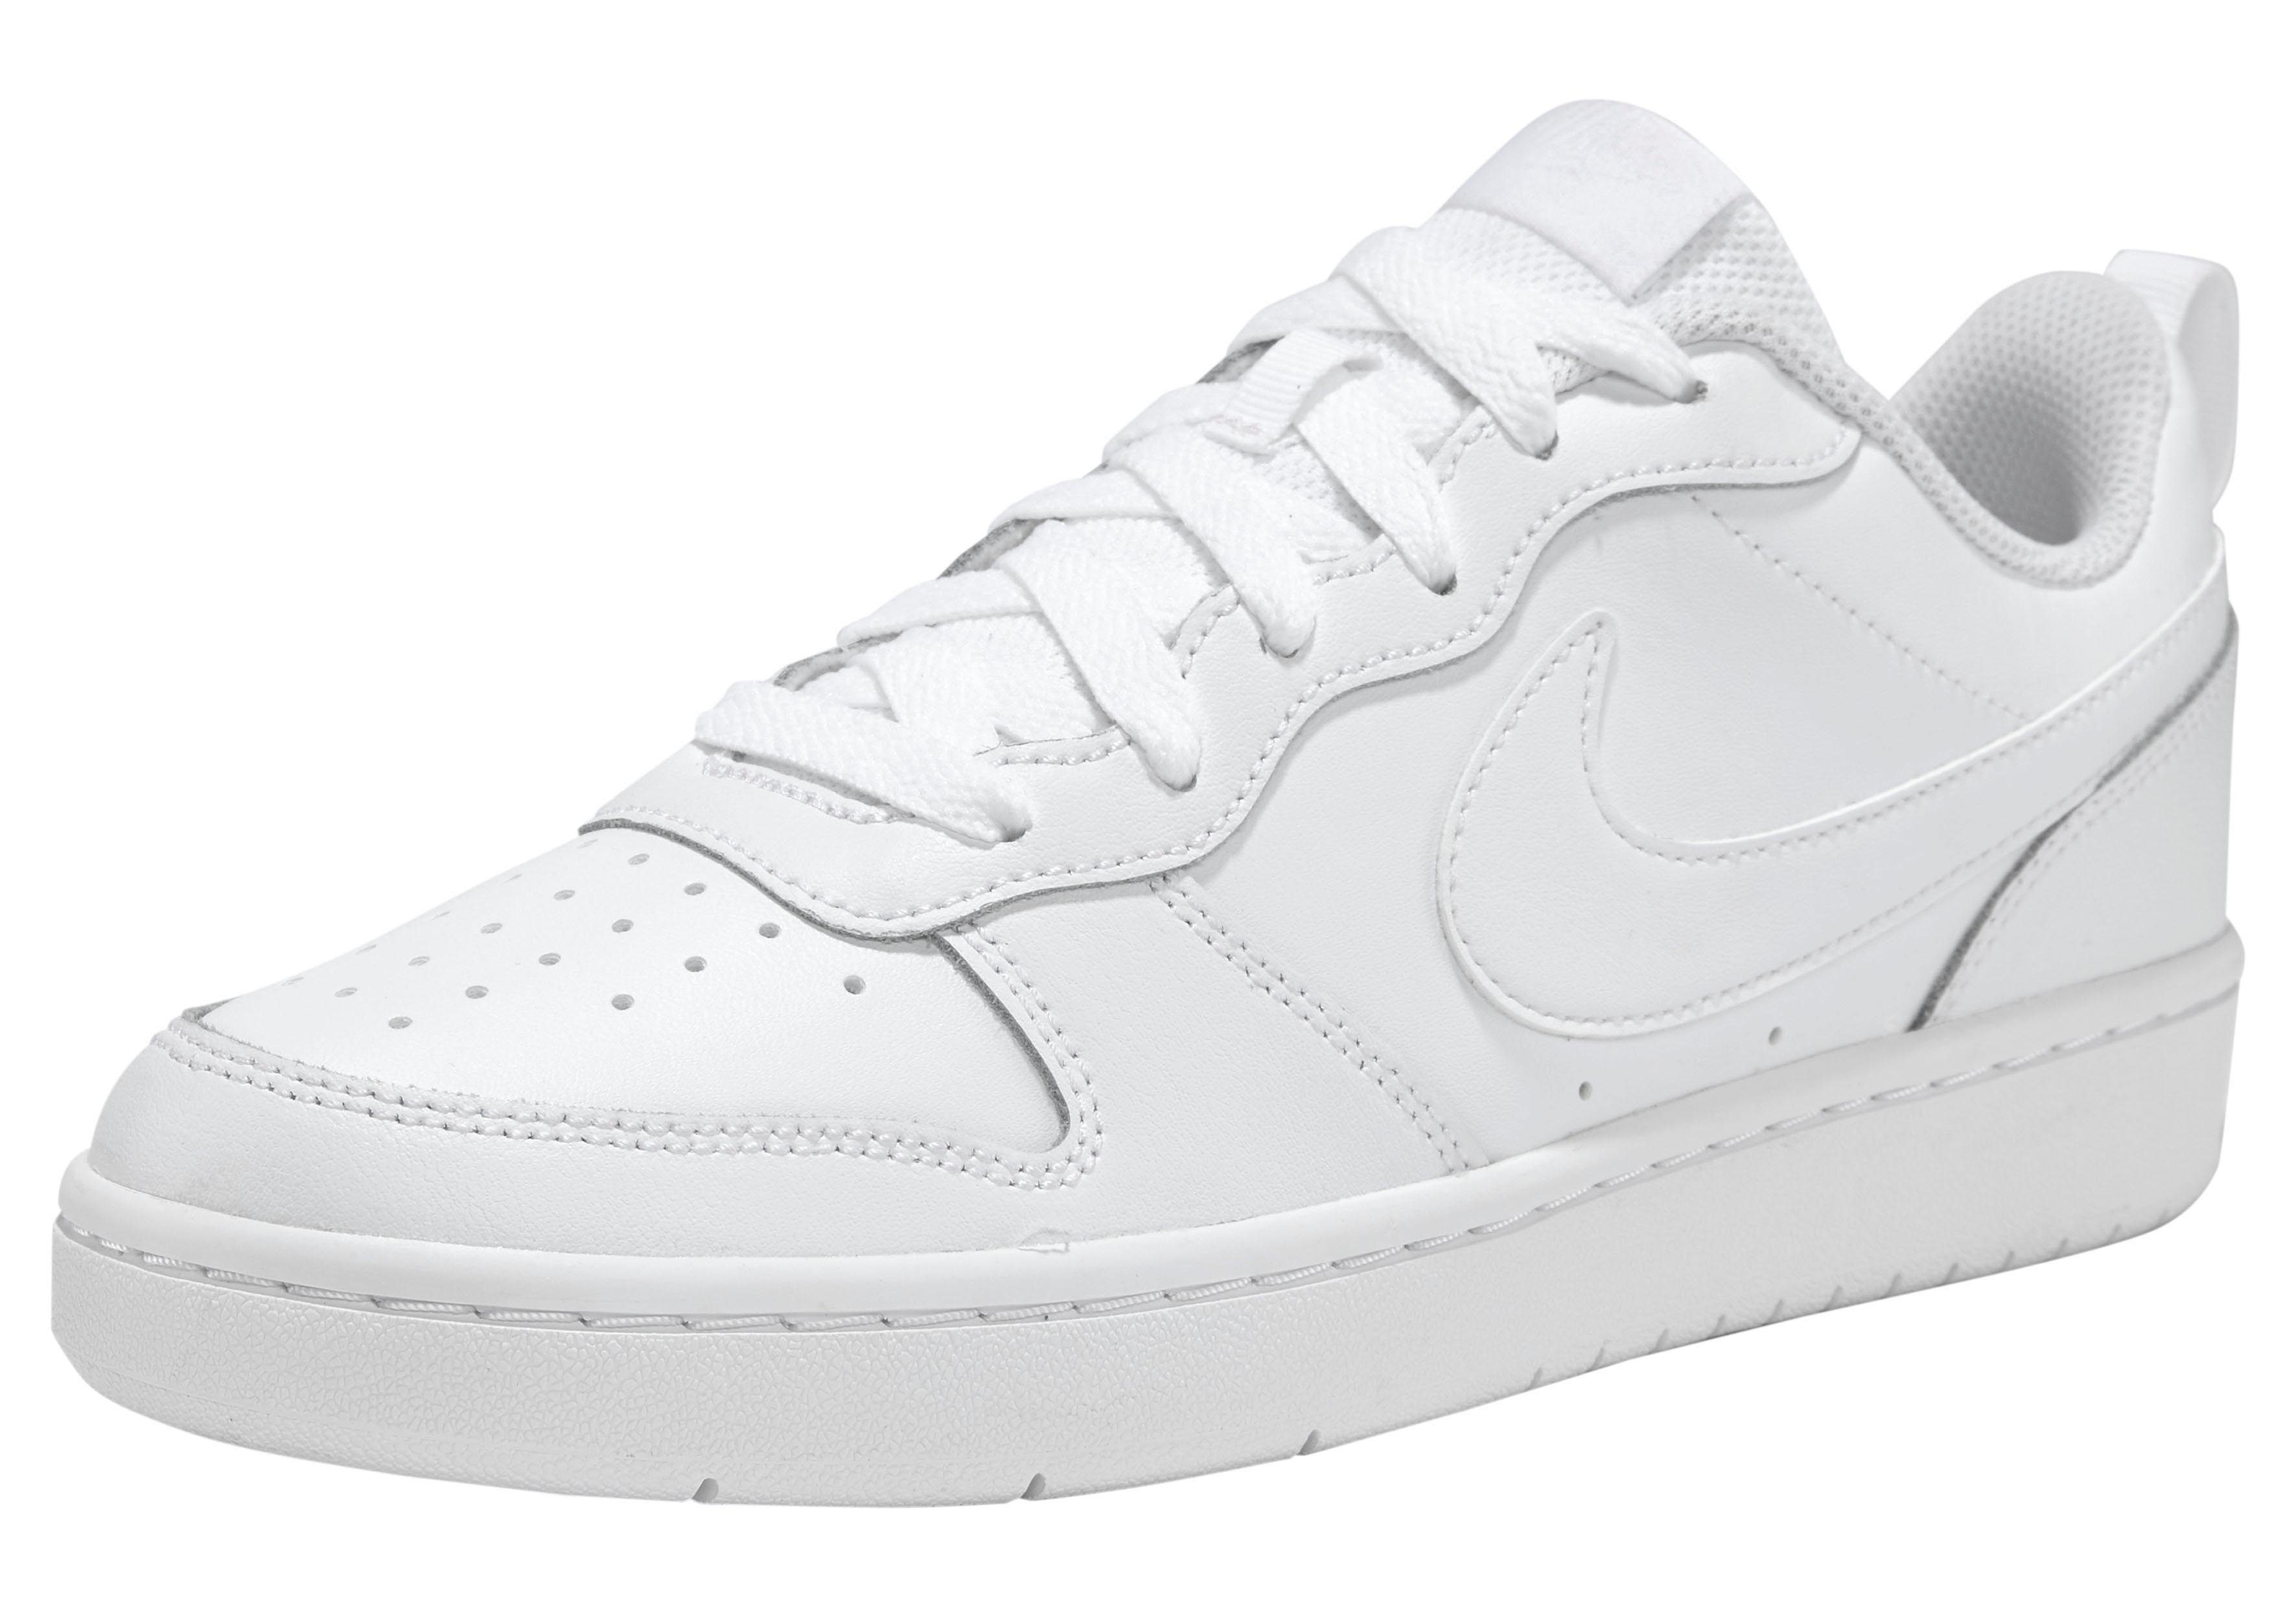 Court vision low next nature. Кеды Nike Court Vision Low. Nike Court Vision Low белые. Nike Court Vision Low 2. Nike Court Vision Low Air Force.